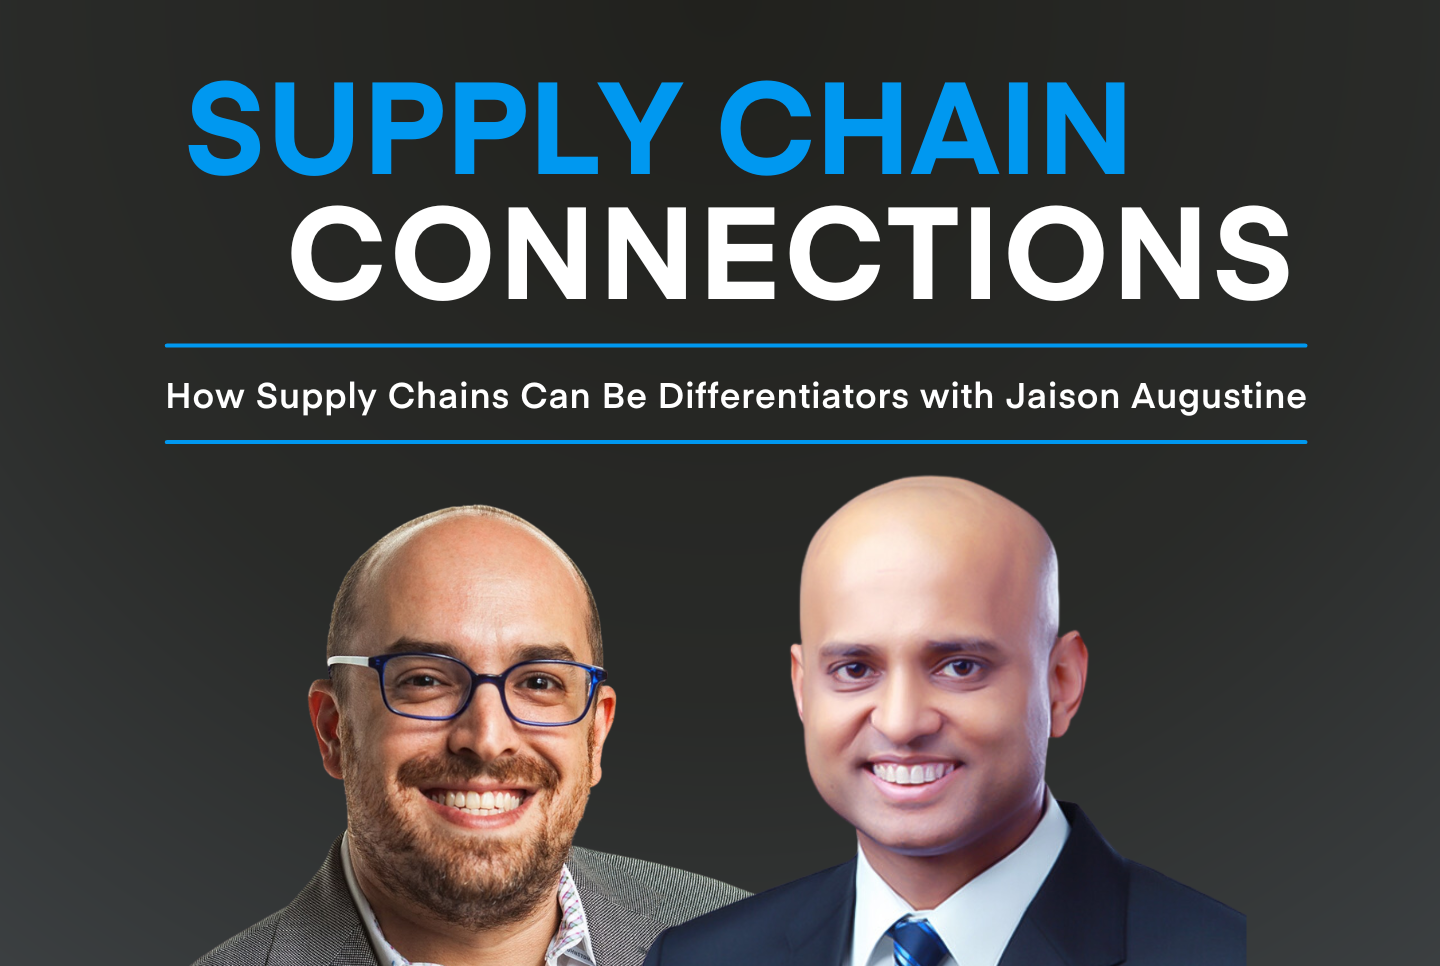 Jaison Augustine, WNS and Brian Glick, Chain.io on the Supply Chain Connections Podcast